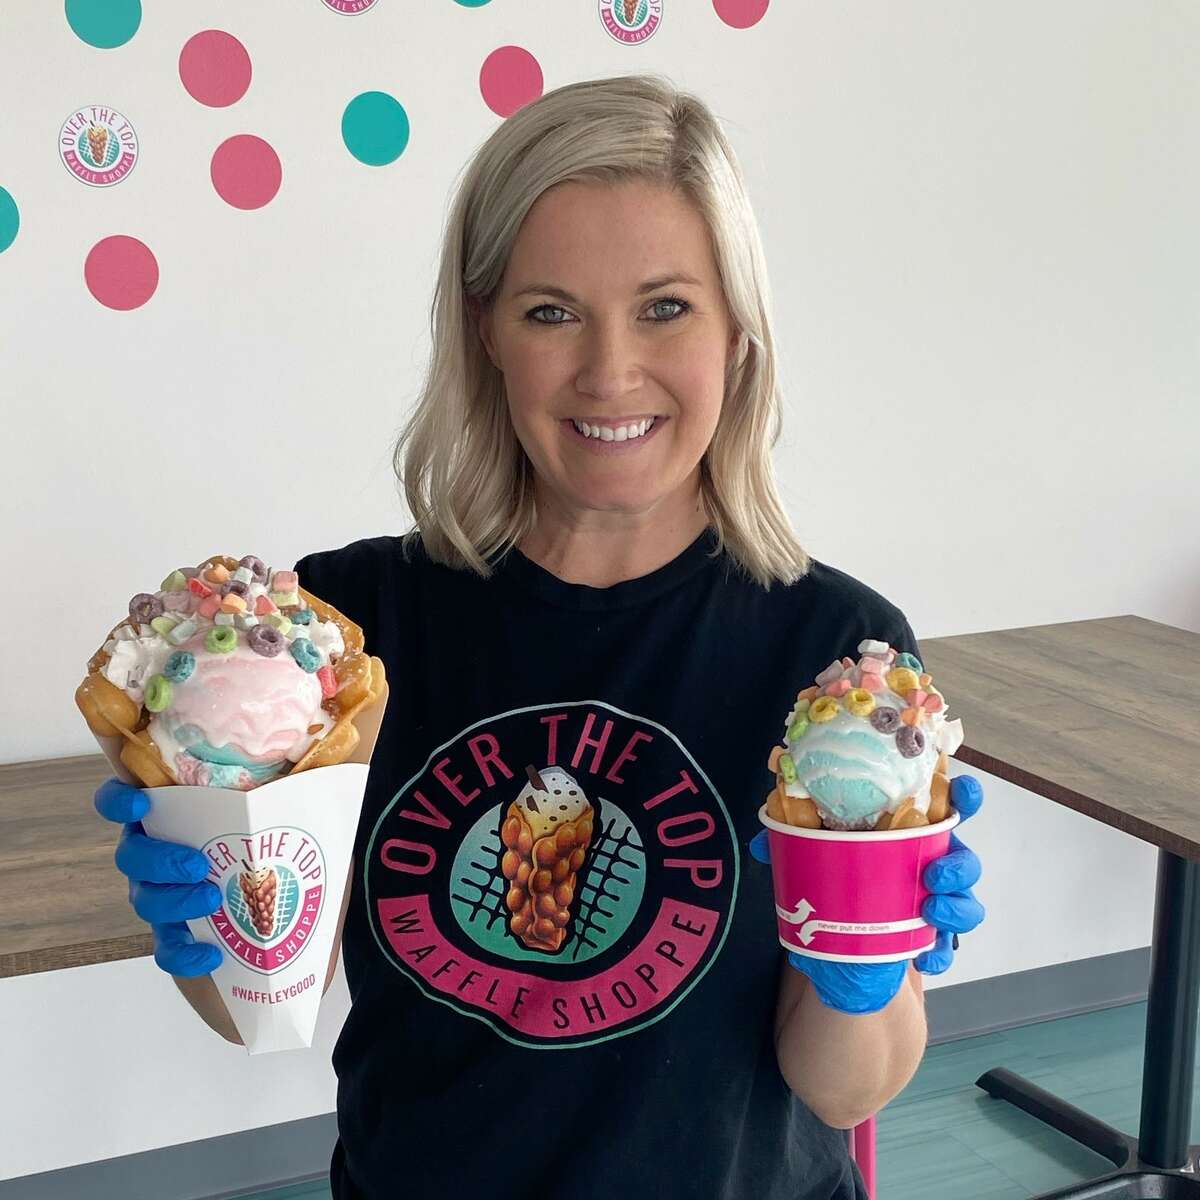 Over the Top Waffle Shoppe owner Kari Young and her husband opened the shop at the start of 2020. Then the COVID-19 pandemic hit.  She then scrambled to put out the word on social media, writing a post in the Katy Fort Bend Foodies Facebook group. "As a new business owner, I am terrified," Young wrote. "We haven't really seen a busy season as of yet. We are clearly going into uncharted waters here." Then, the very next day after her post, Young was stunned by the overwhelming response of the Richmond community.